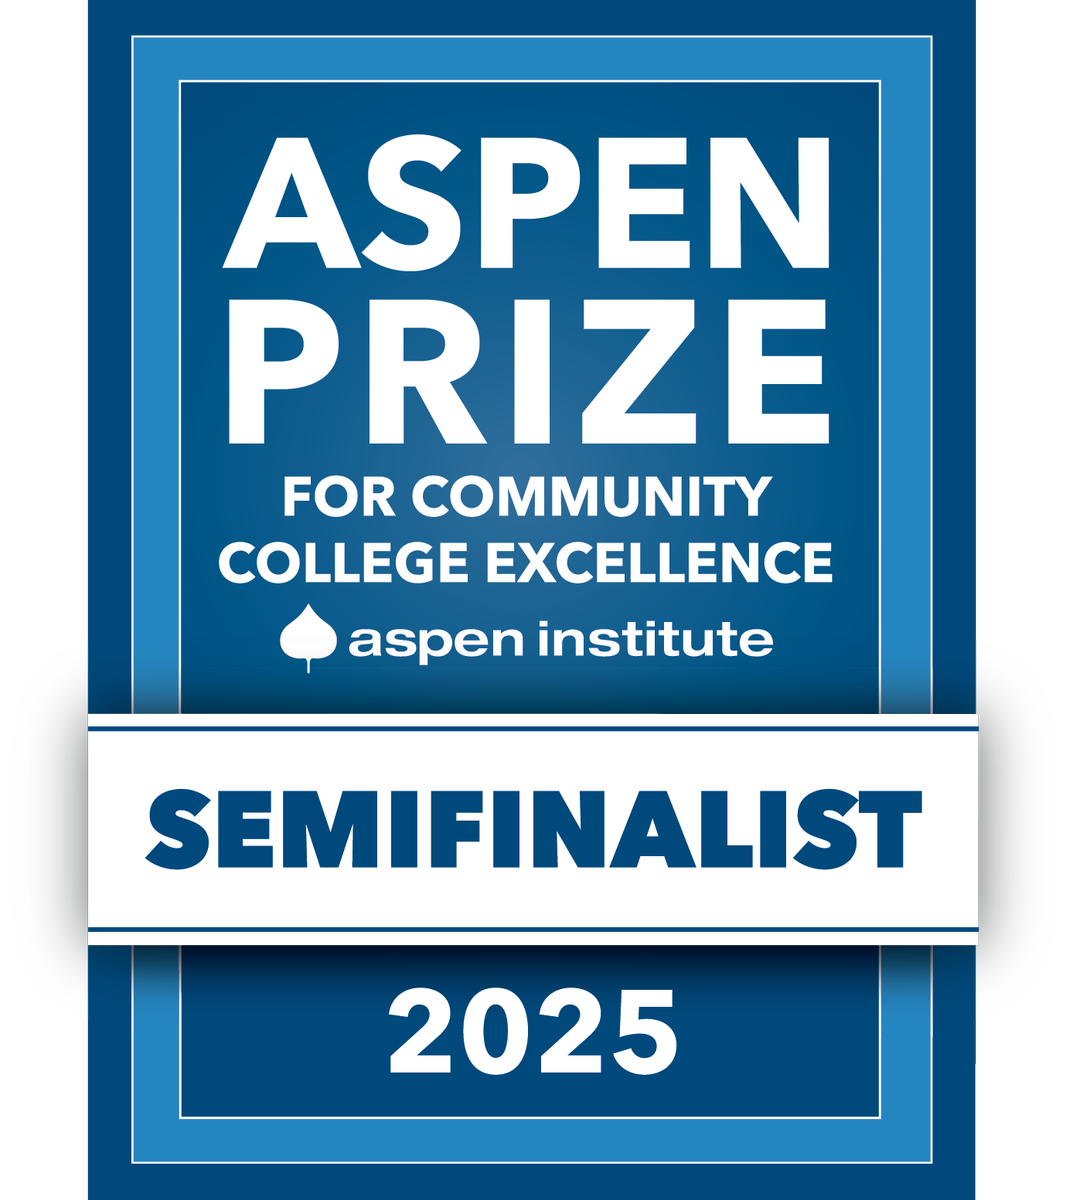 Congratulations to @MiraCosta & @MoorparkCollege for being selected as #AspenPrize semifinalists for Community College Excellence! as.pn/prize To learn more about low-cost & high-quality education, visit ICanGoToCollege.com! #CommunityCollegeProud